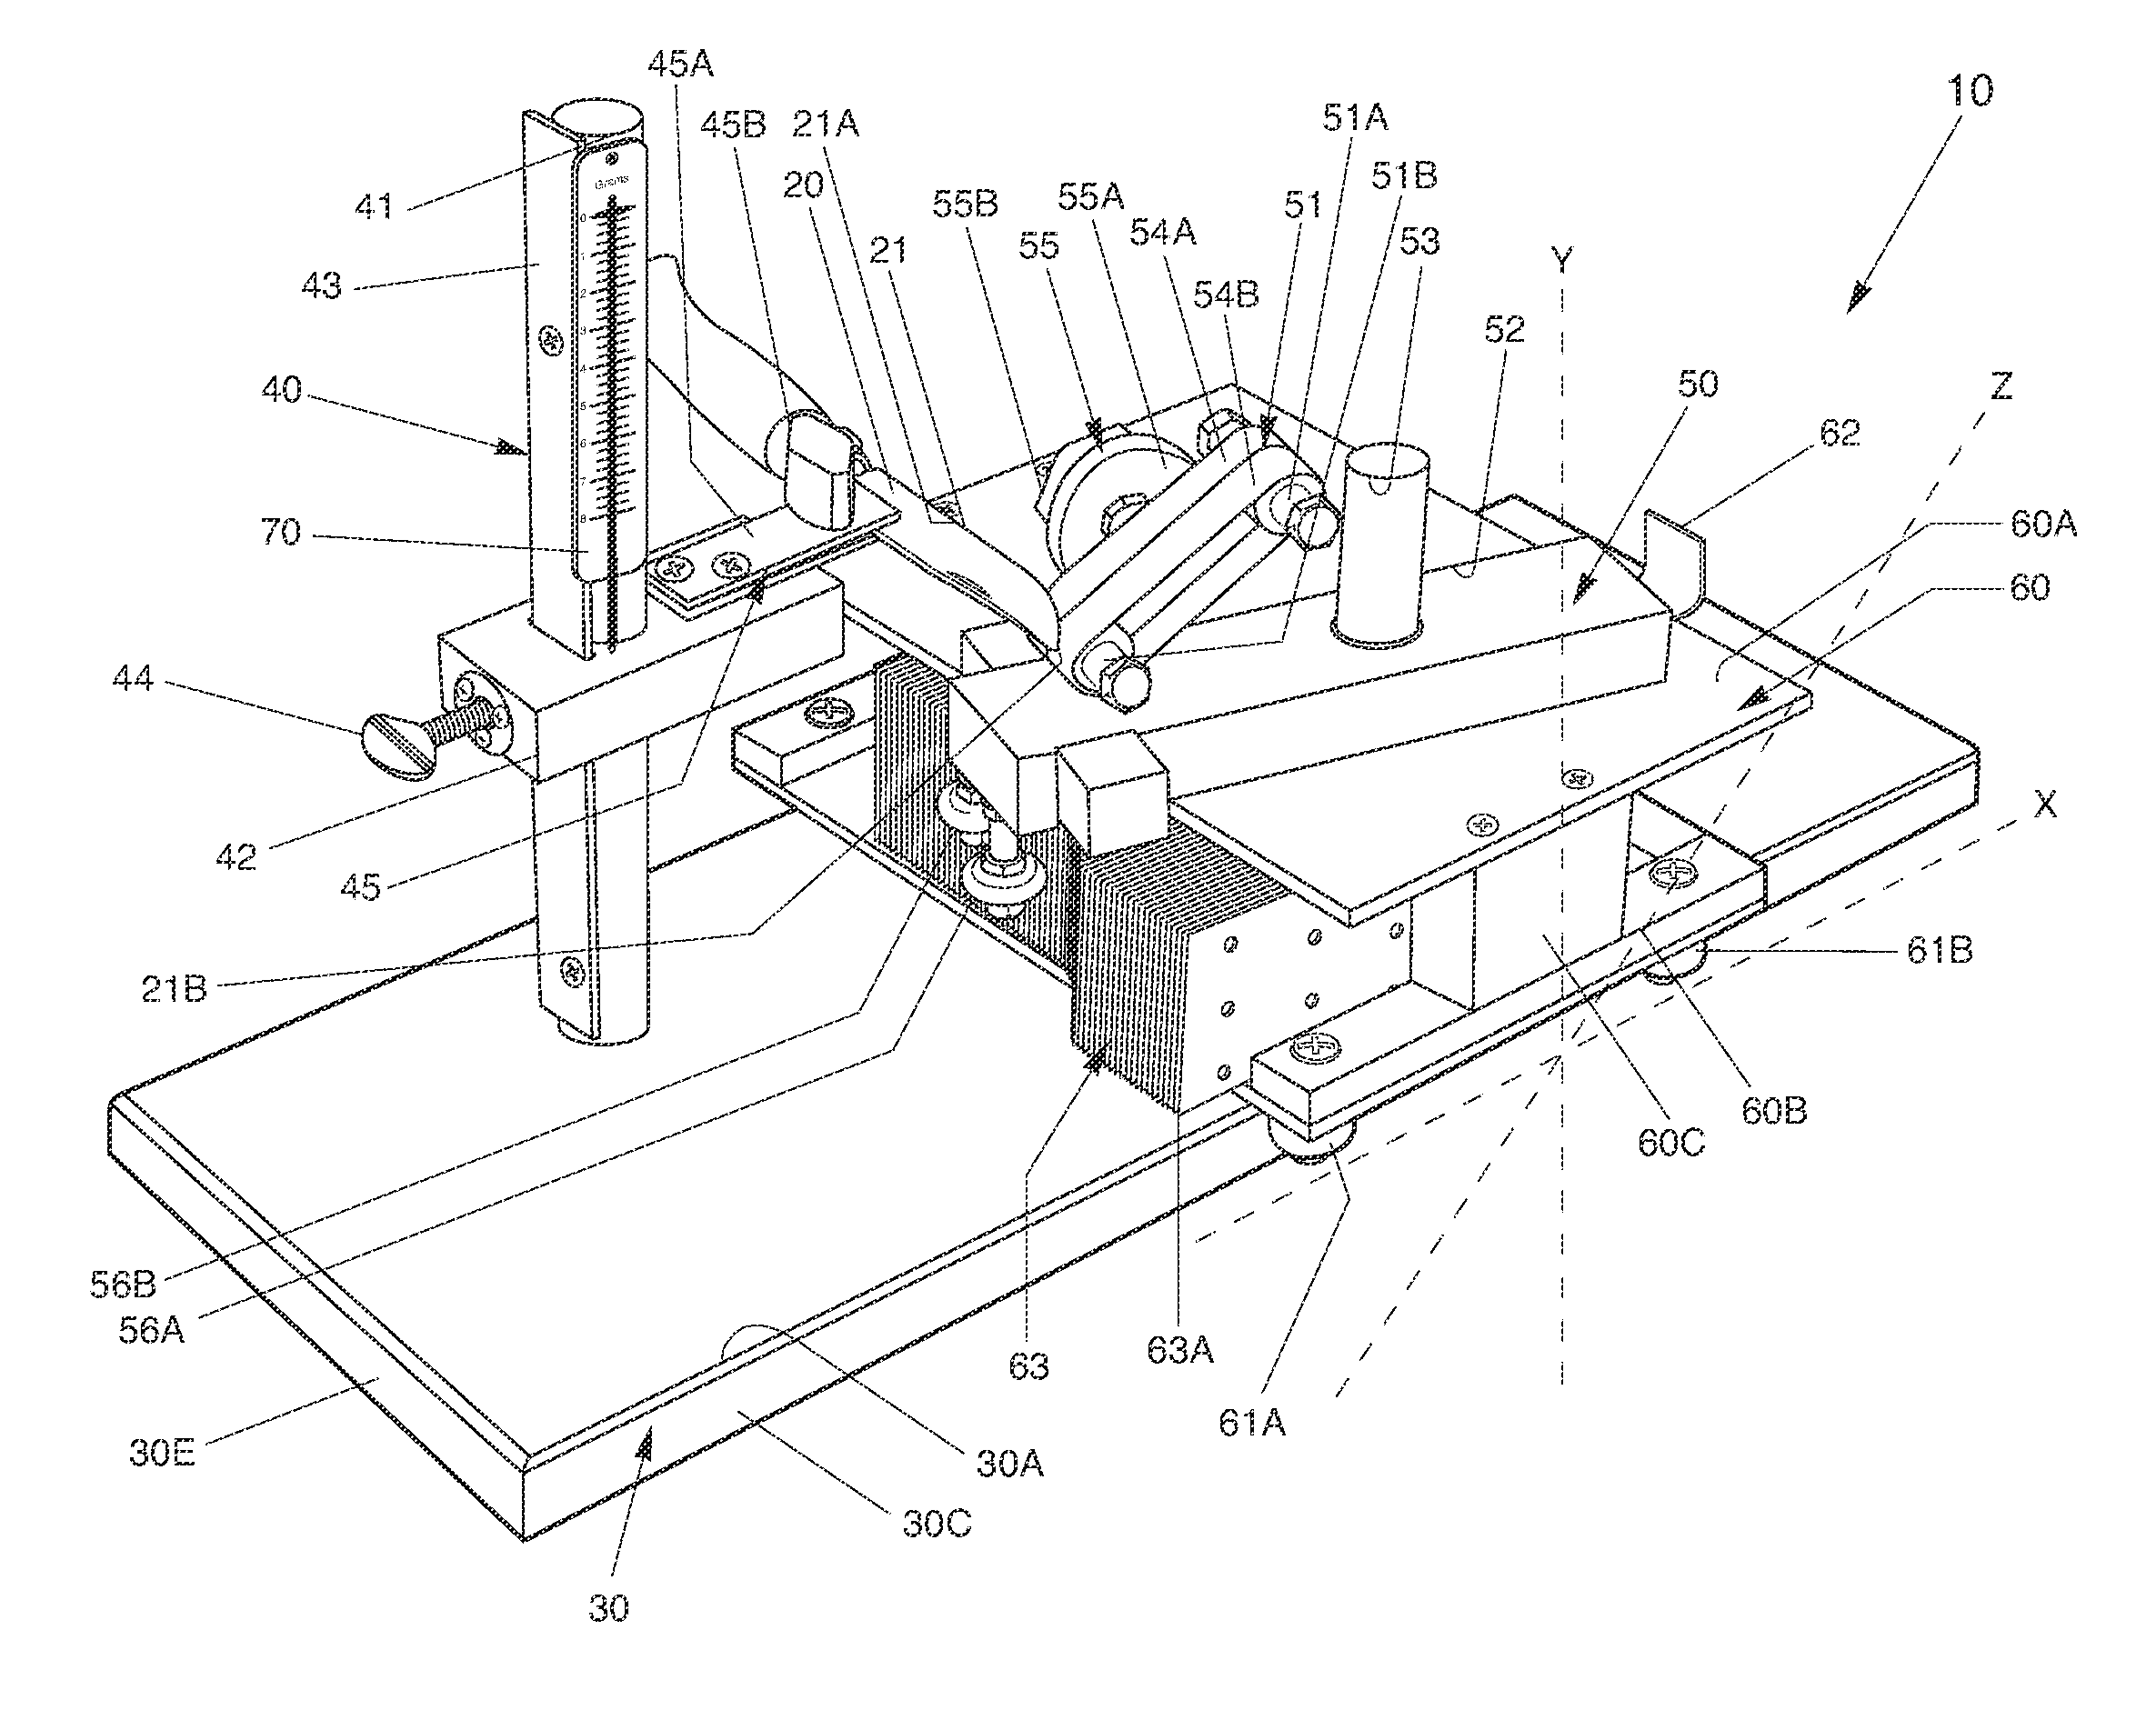 Blade sharpening device with blade contour copying device